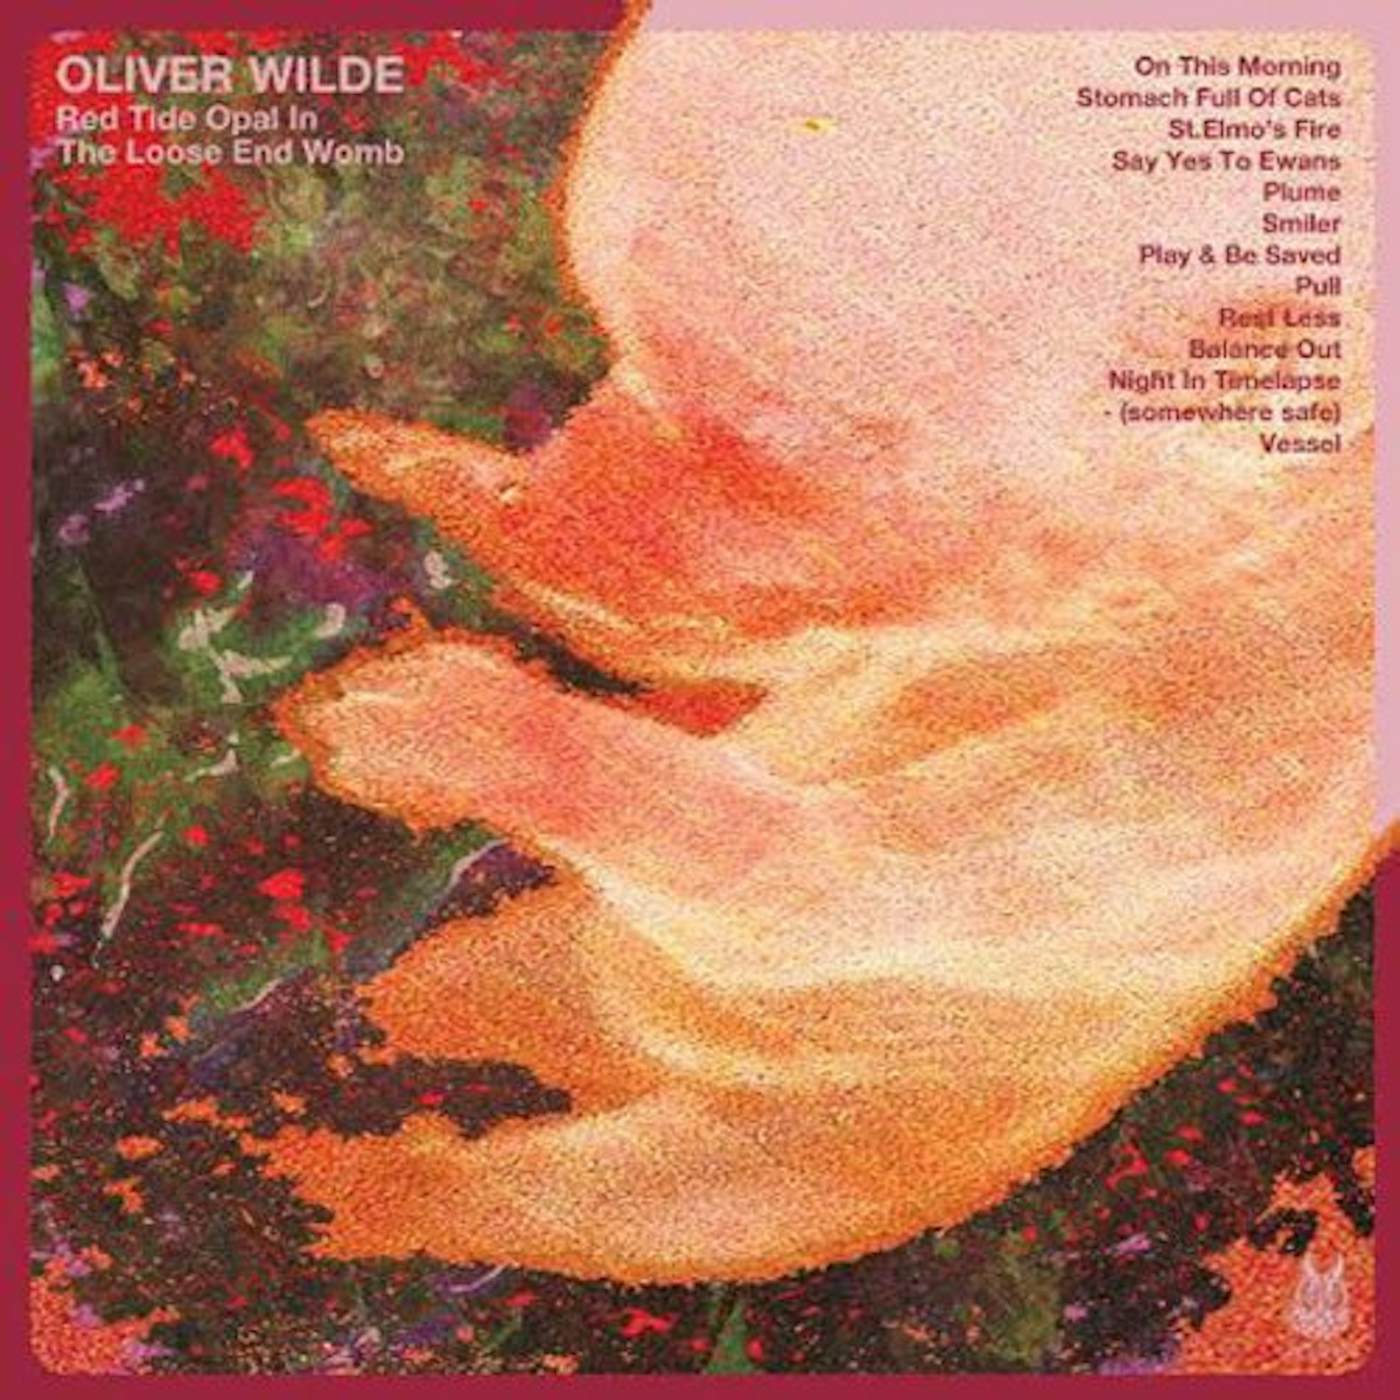 Oliver Wilde RED TIDE OPAL IN THE LOOSE END Vinyl Record